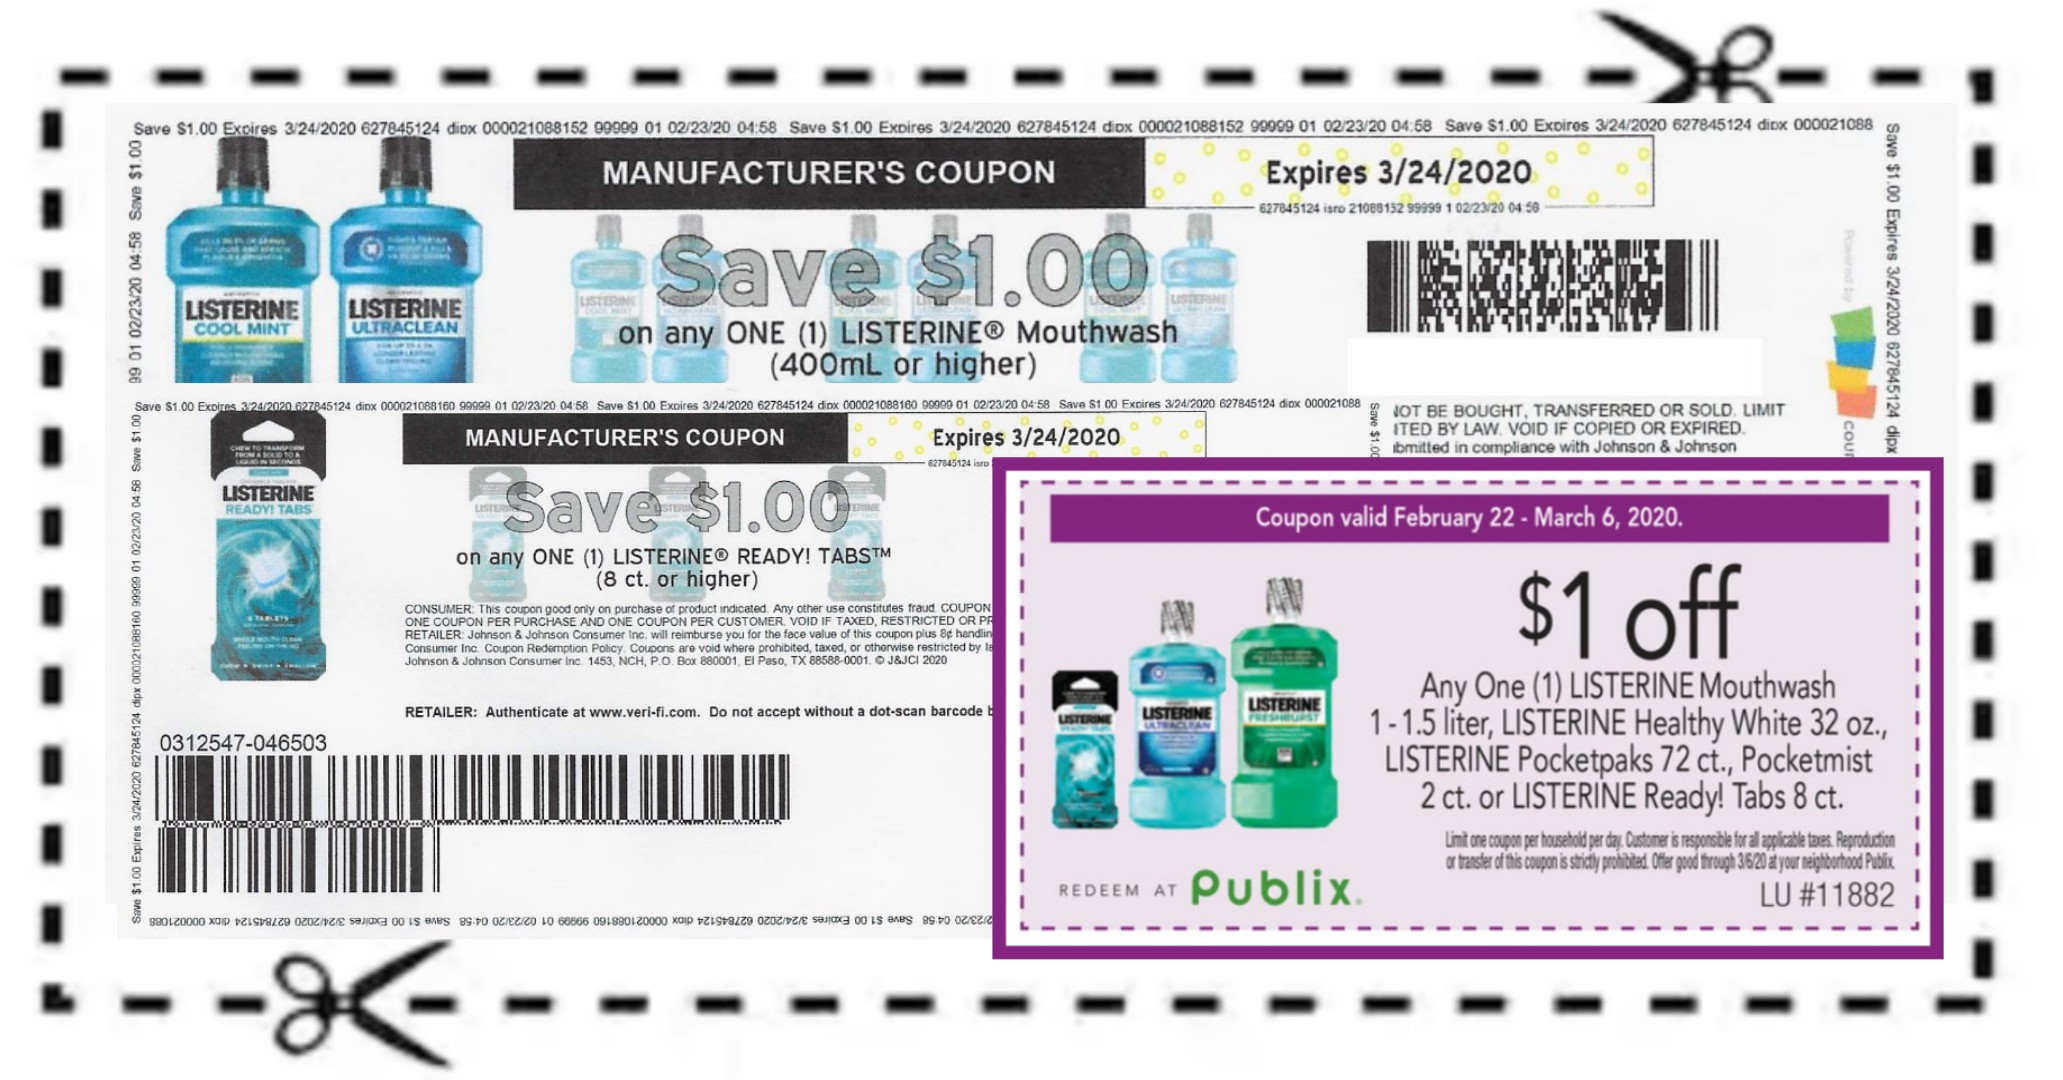 2 New Listerine Coupons - $1/1 Publix Coupon to Stack